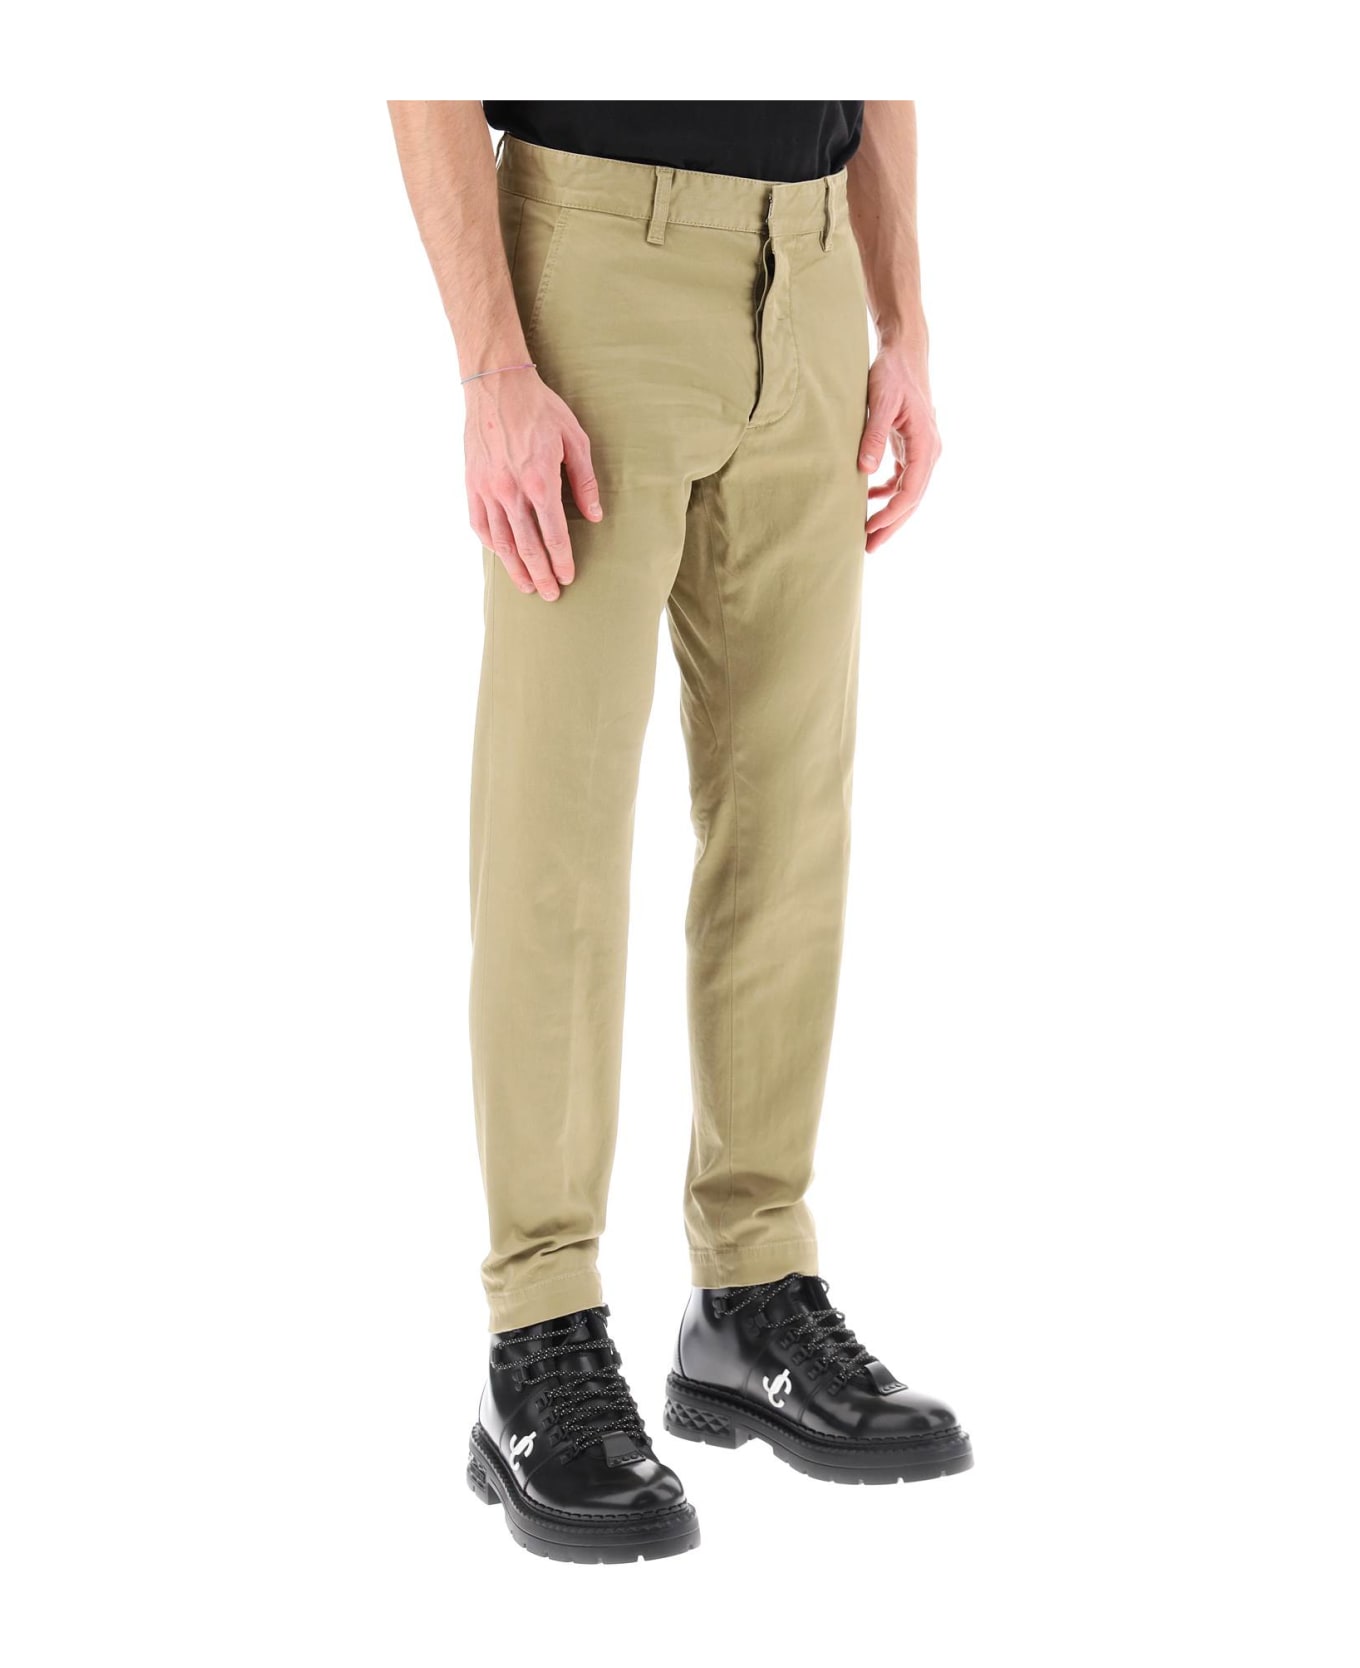 Dsquared2 Cool Guy Pants - TAUPE (Beige)